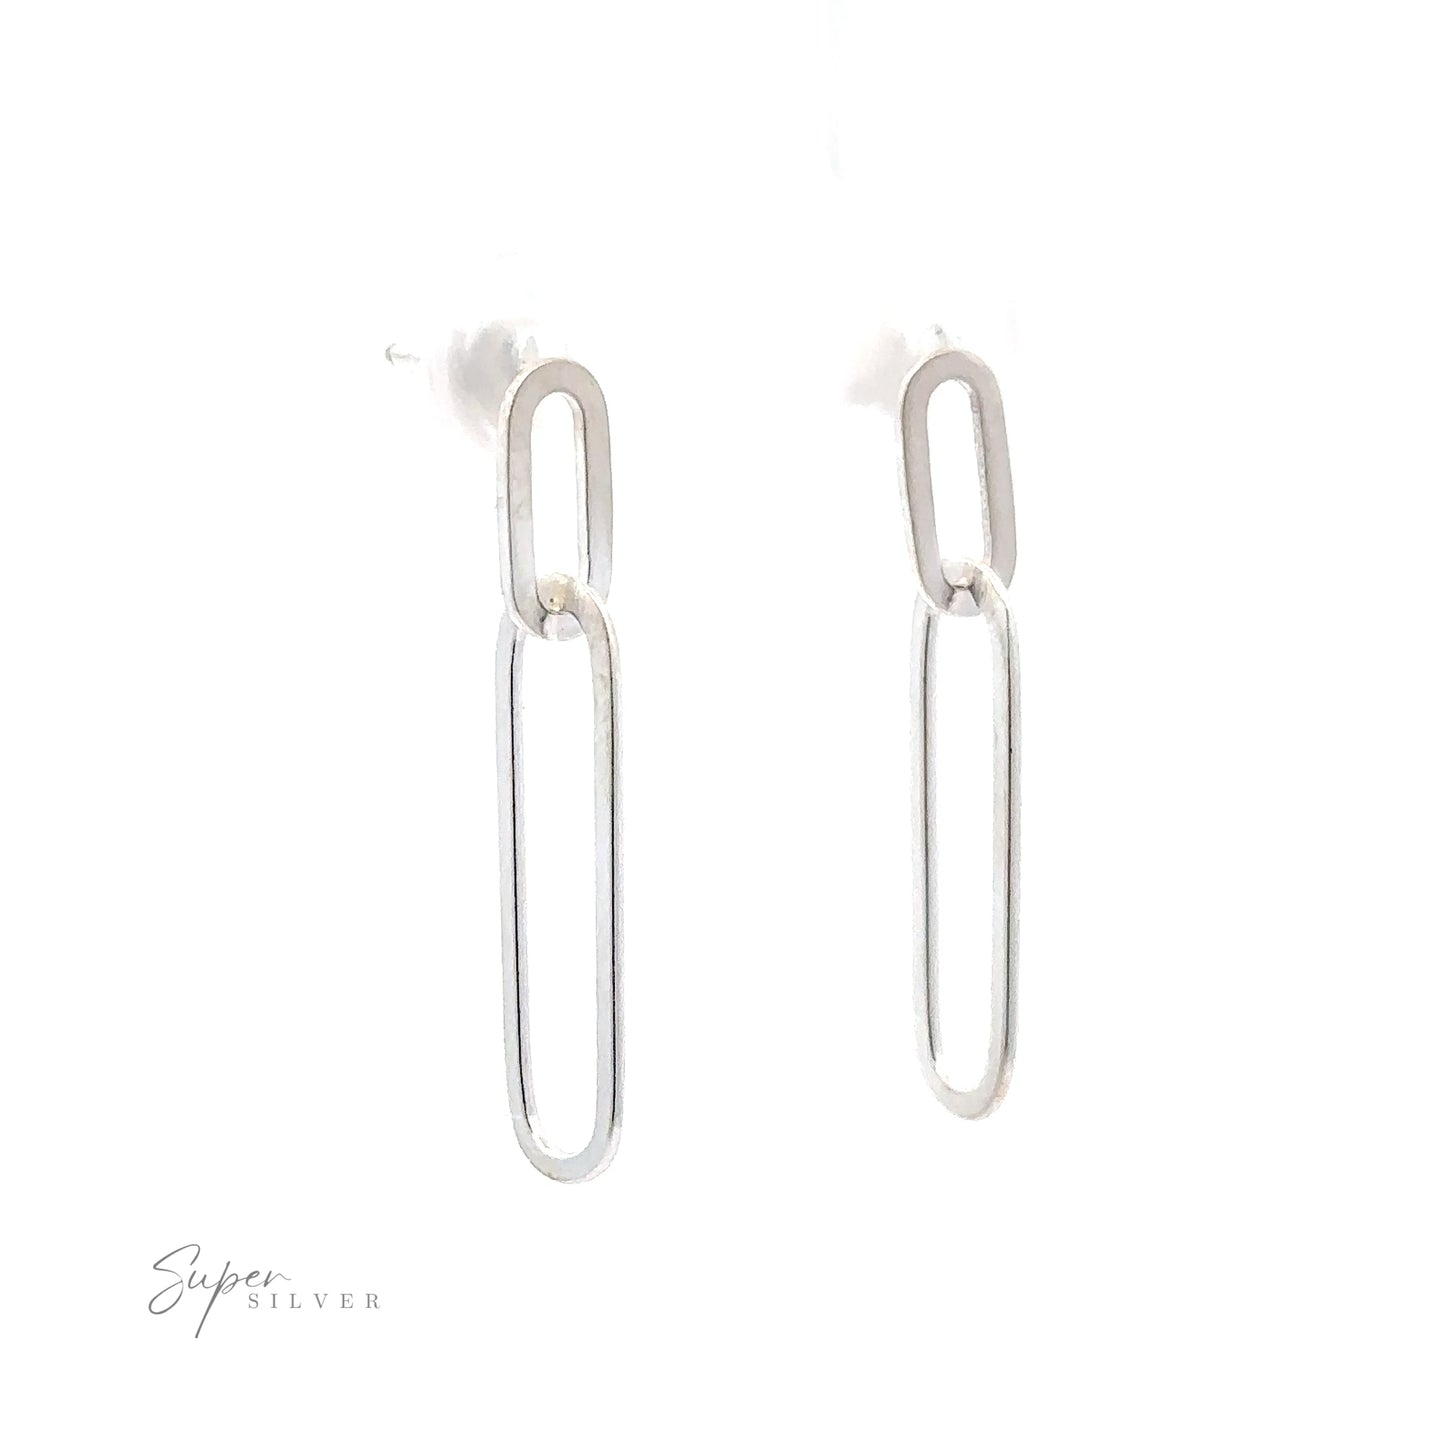 These modern sterling silver Chain Link Post Earrings feature a chain link design.